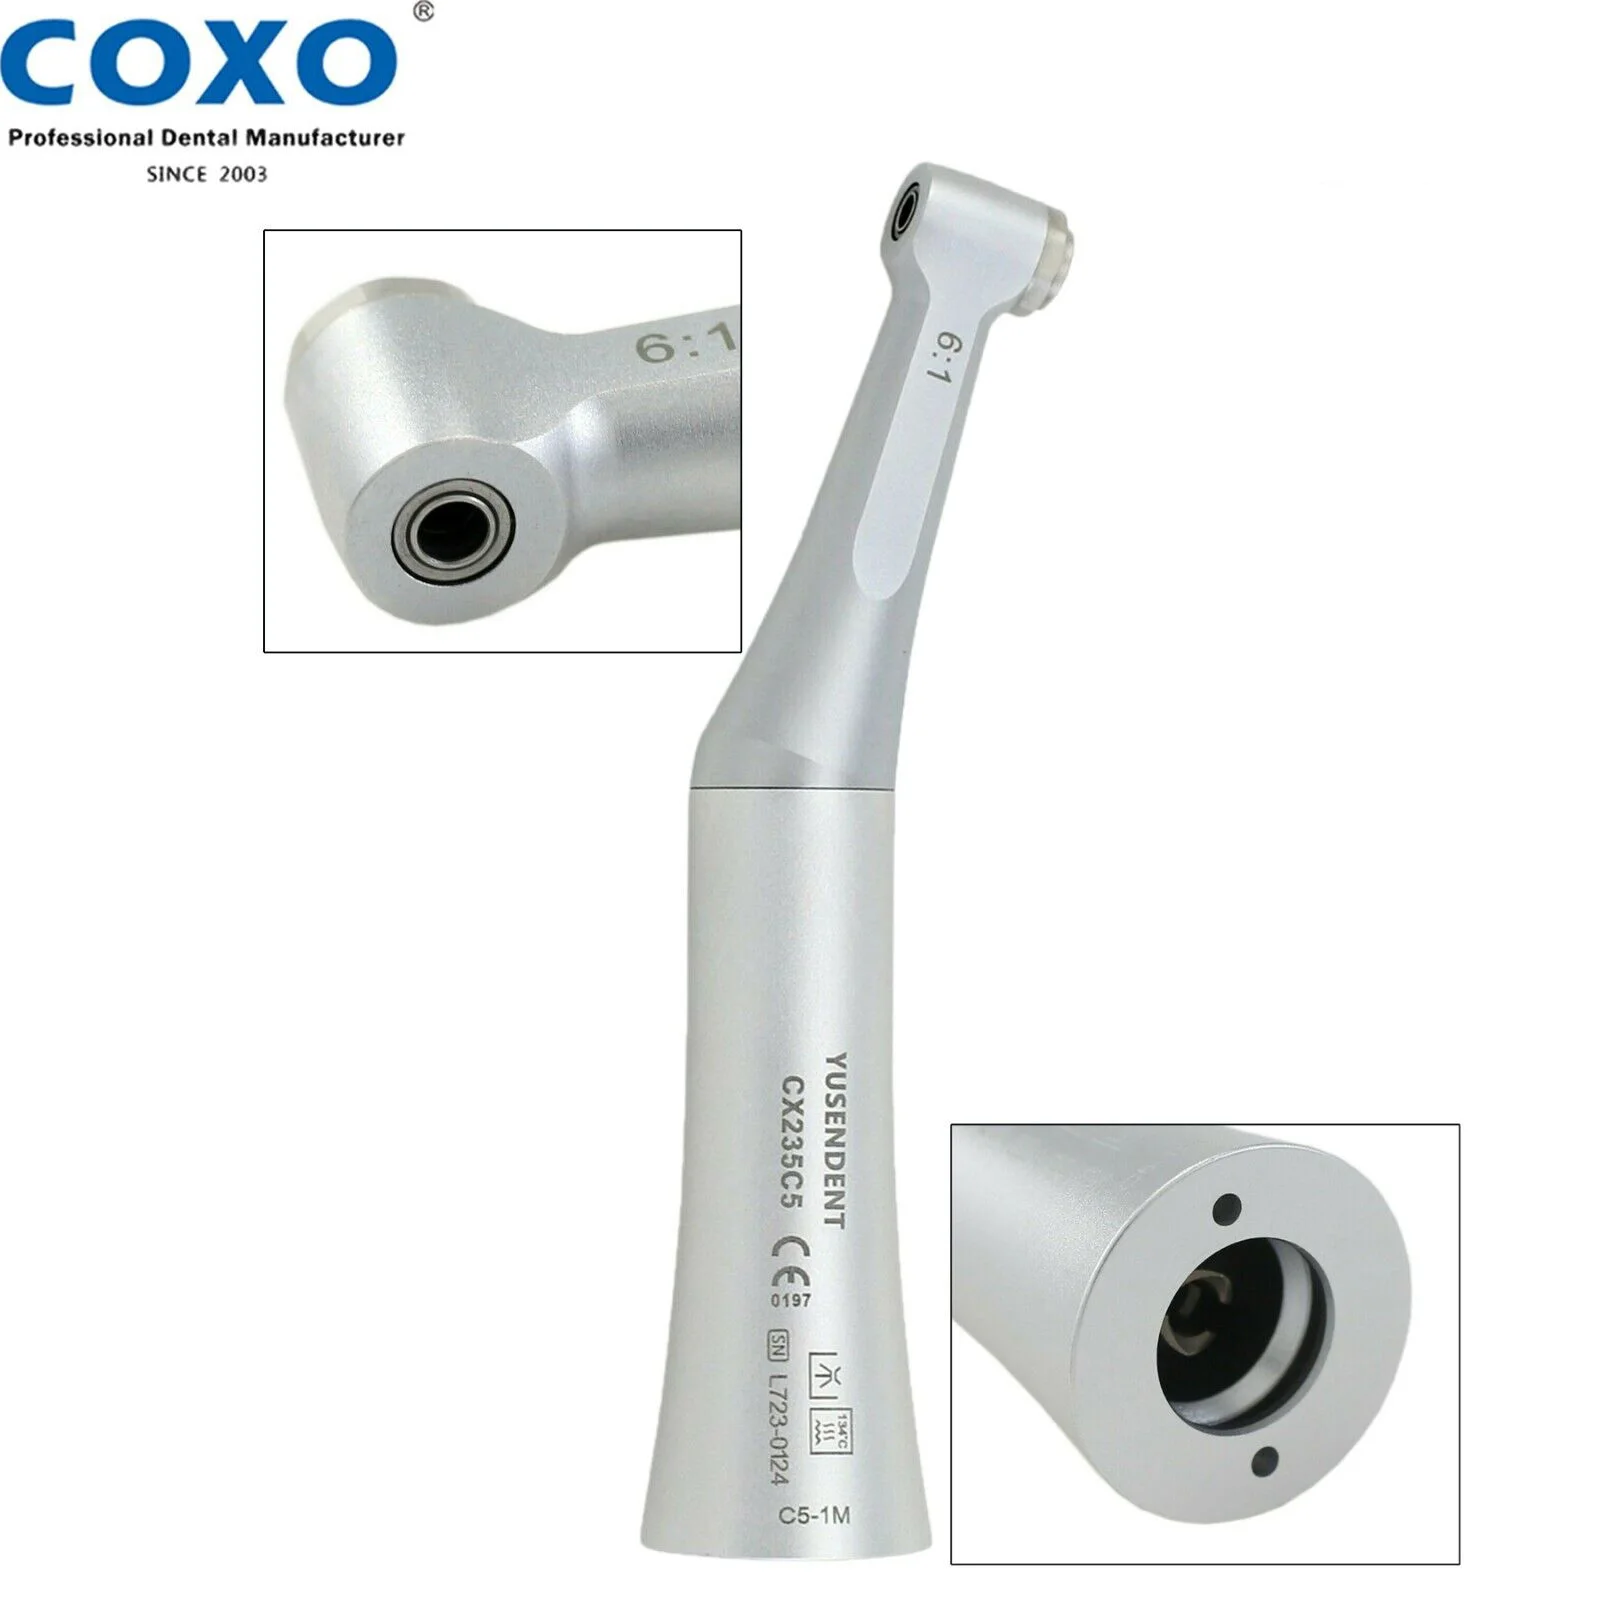 COXO Dental 6:1 Reduction Contra Angle Mini Endo Handpiece Fit Dentsply Wave One VDW ISO E Type Endodontic Treatment